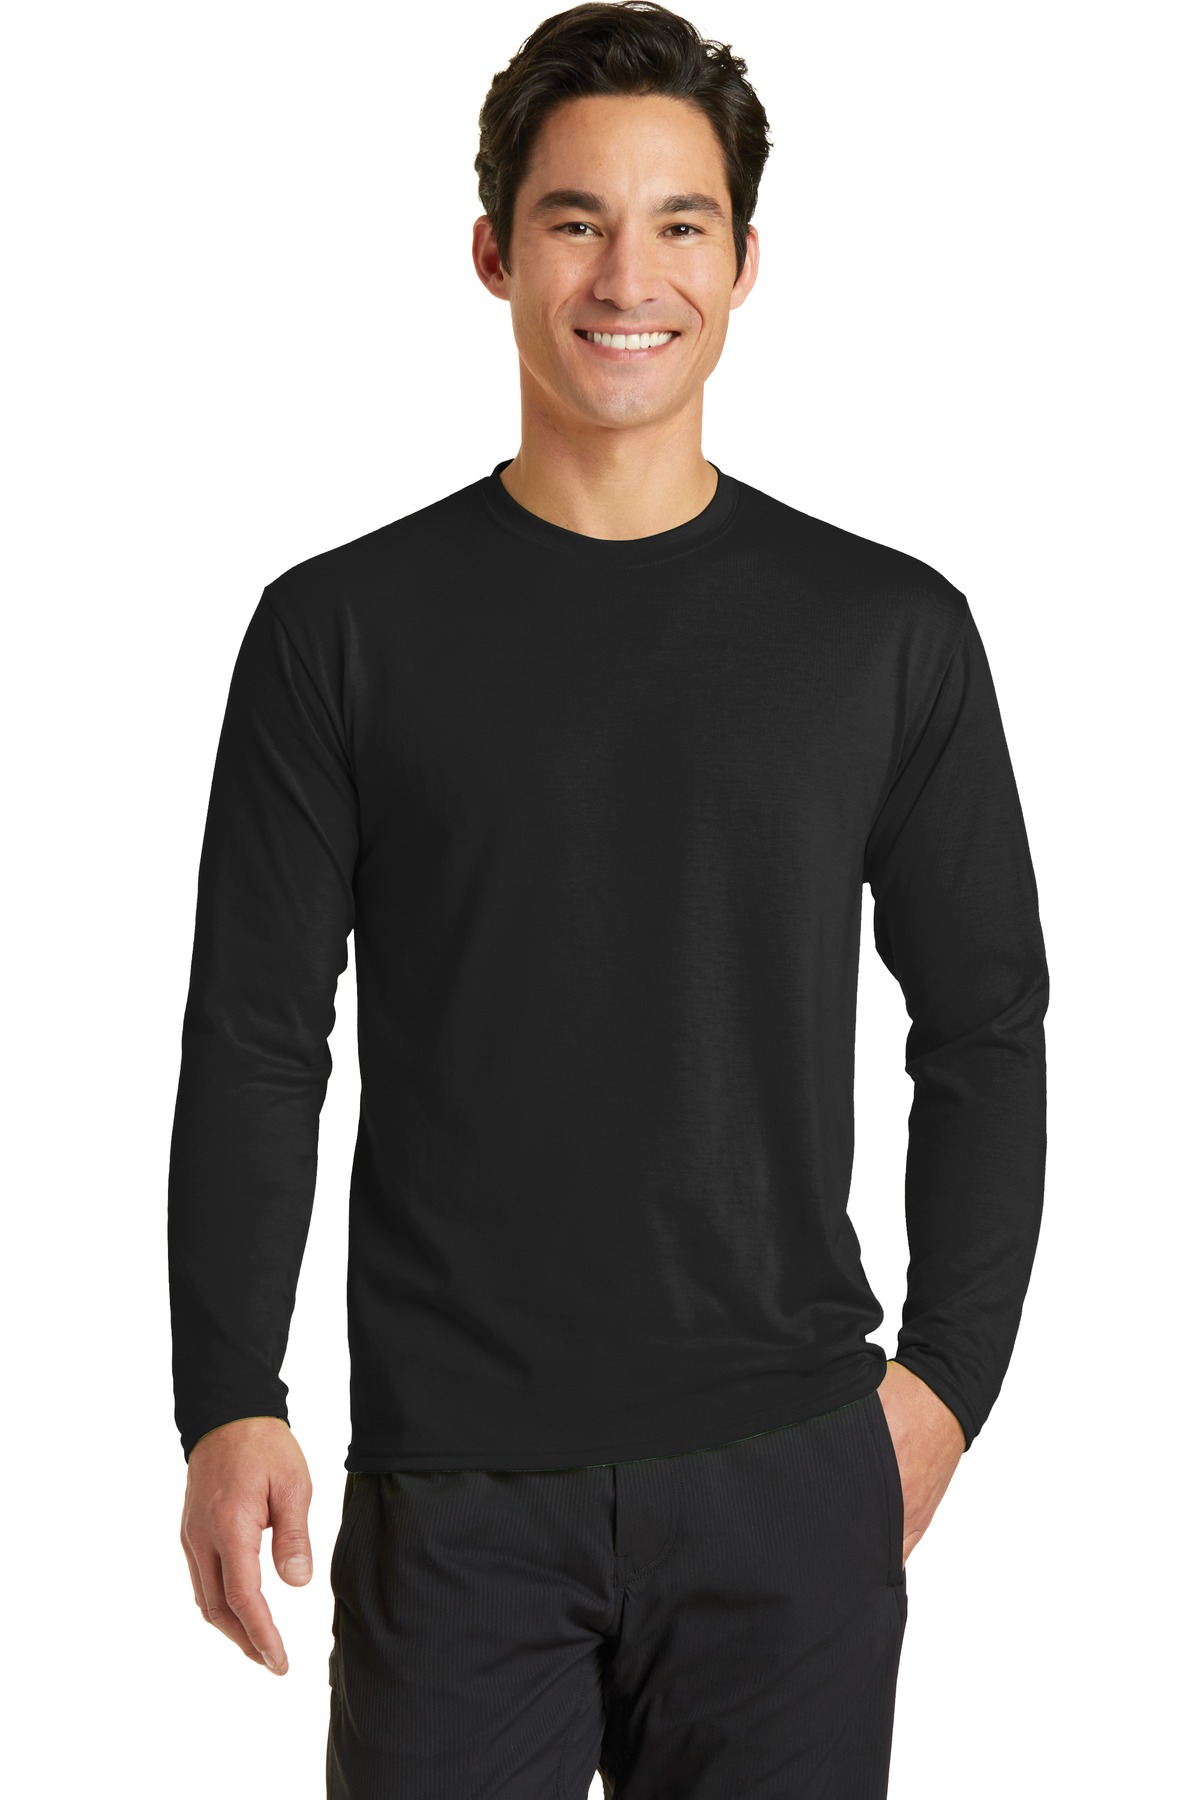 Port & Company  PC381LS - Long Sleeve Essential Blended Performance Tee